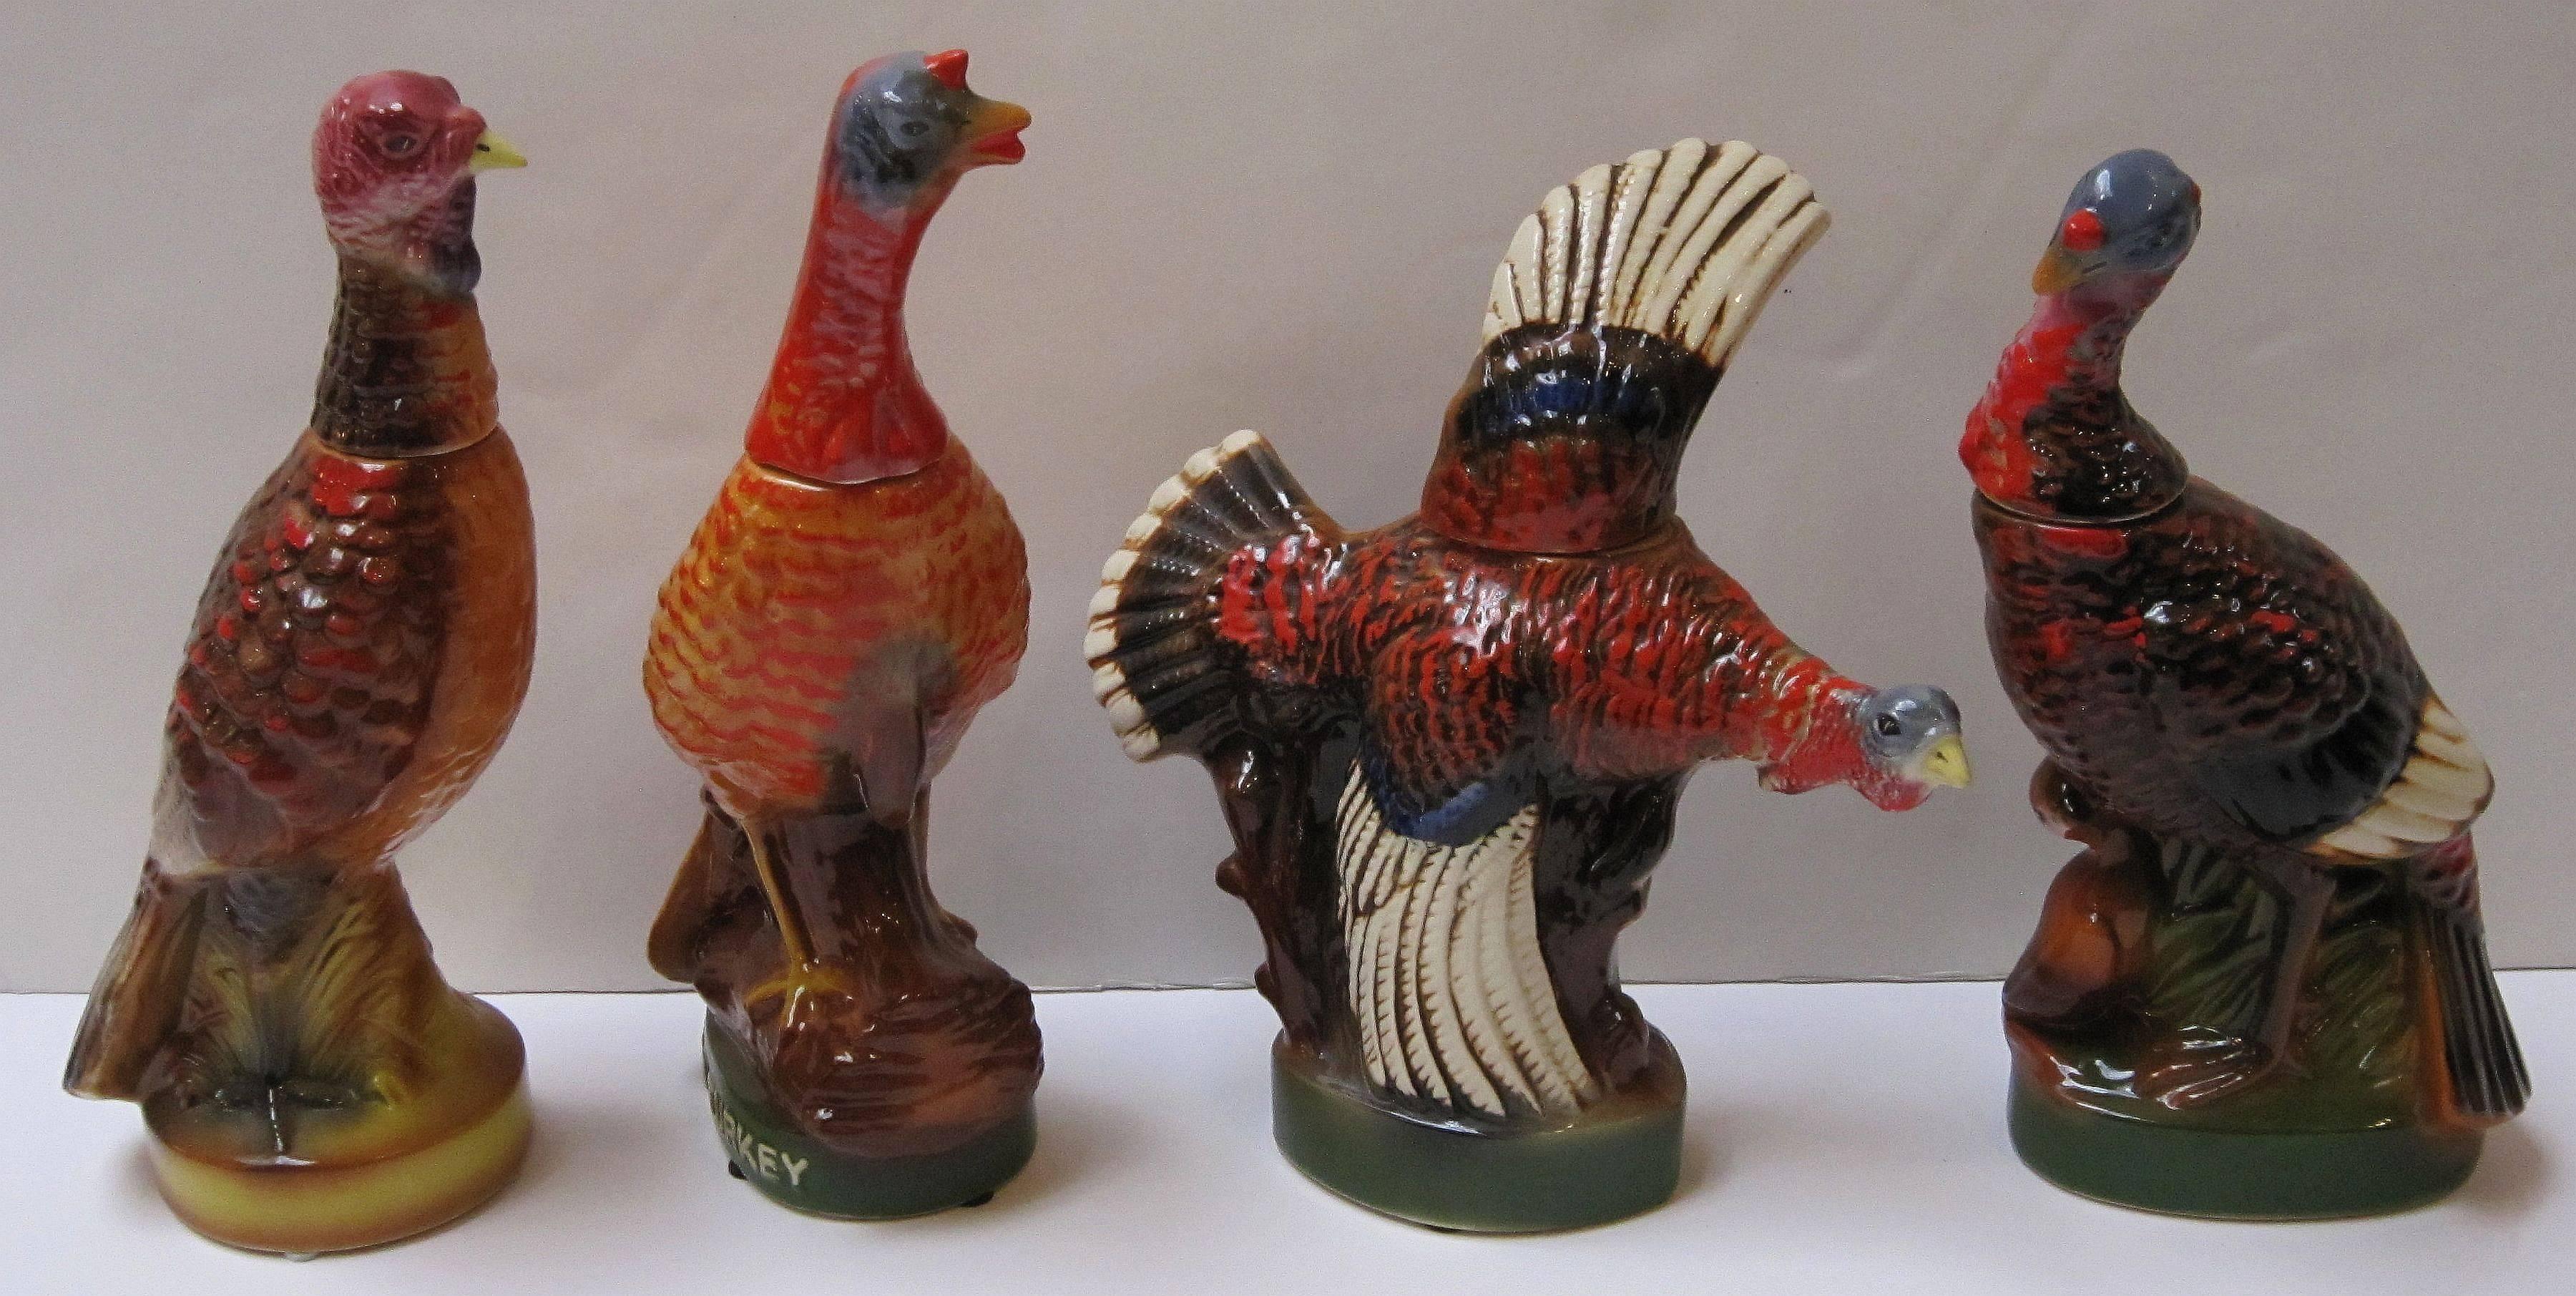 A set of eight large vintage Wild Turkey decanters featuring the hard-to-find #1 and #2 decanters and the popular #3 flying and #8 fan-tail decanters.

Marked on base: Austin Nichols ceramic creation liquor bottle, Wild Turkey 101 proof, 8 years